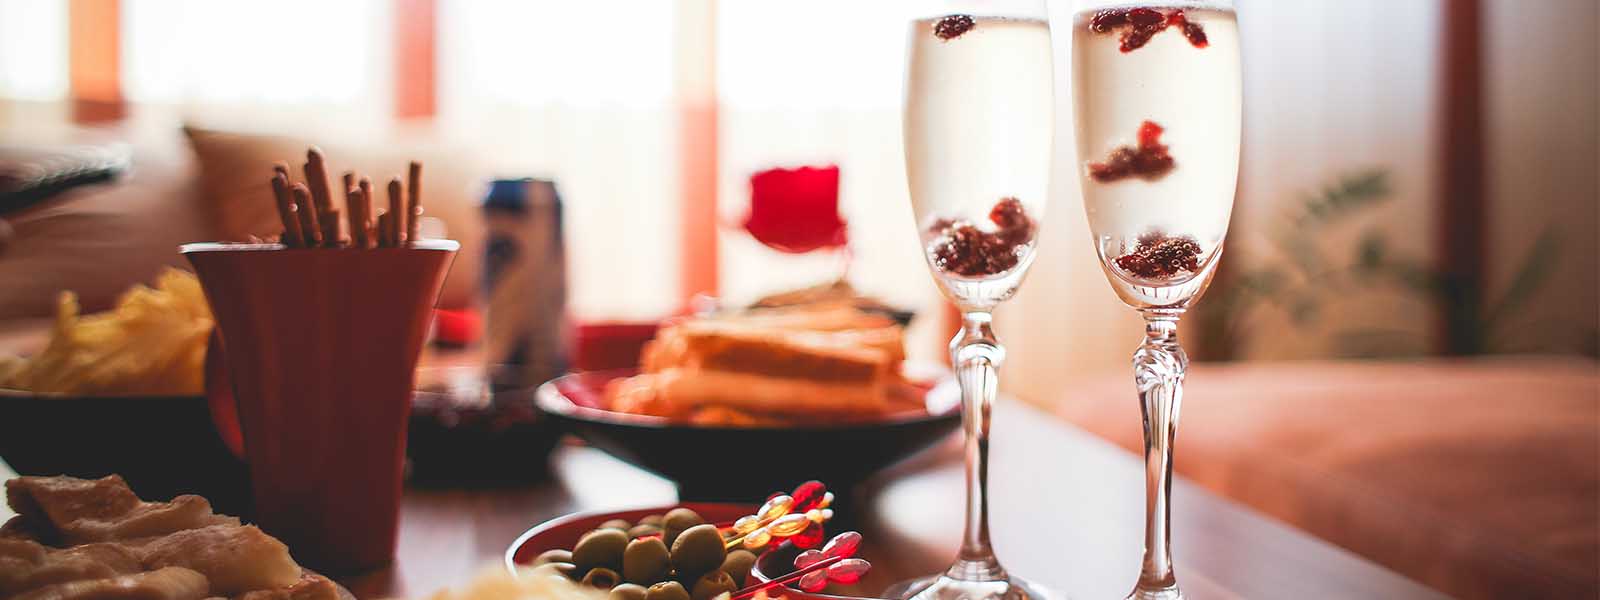 Chrismas nibbles with champagne and spices